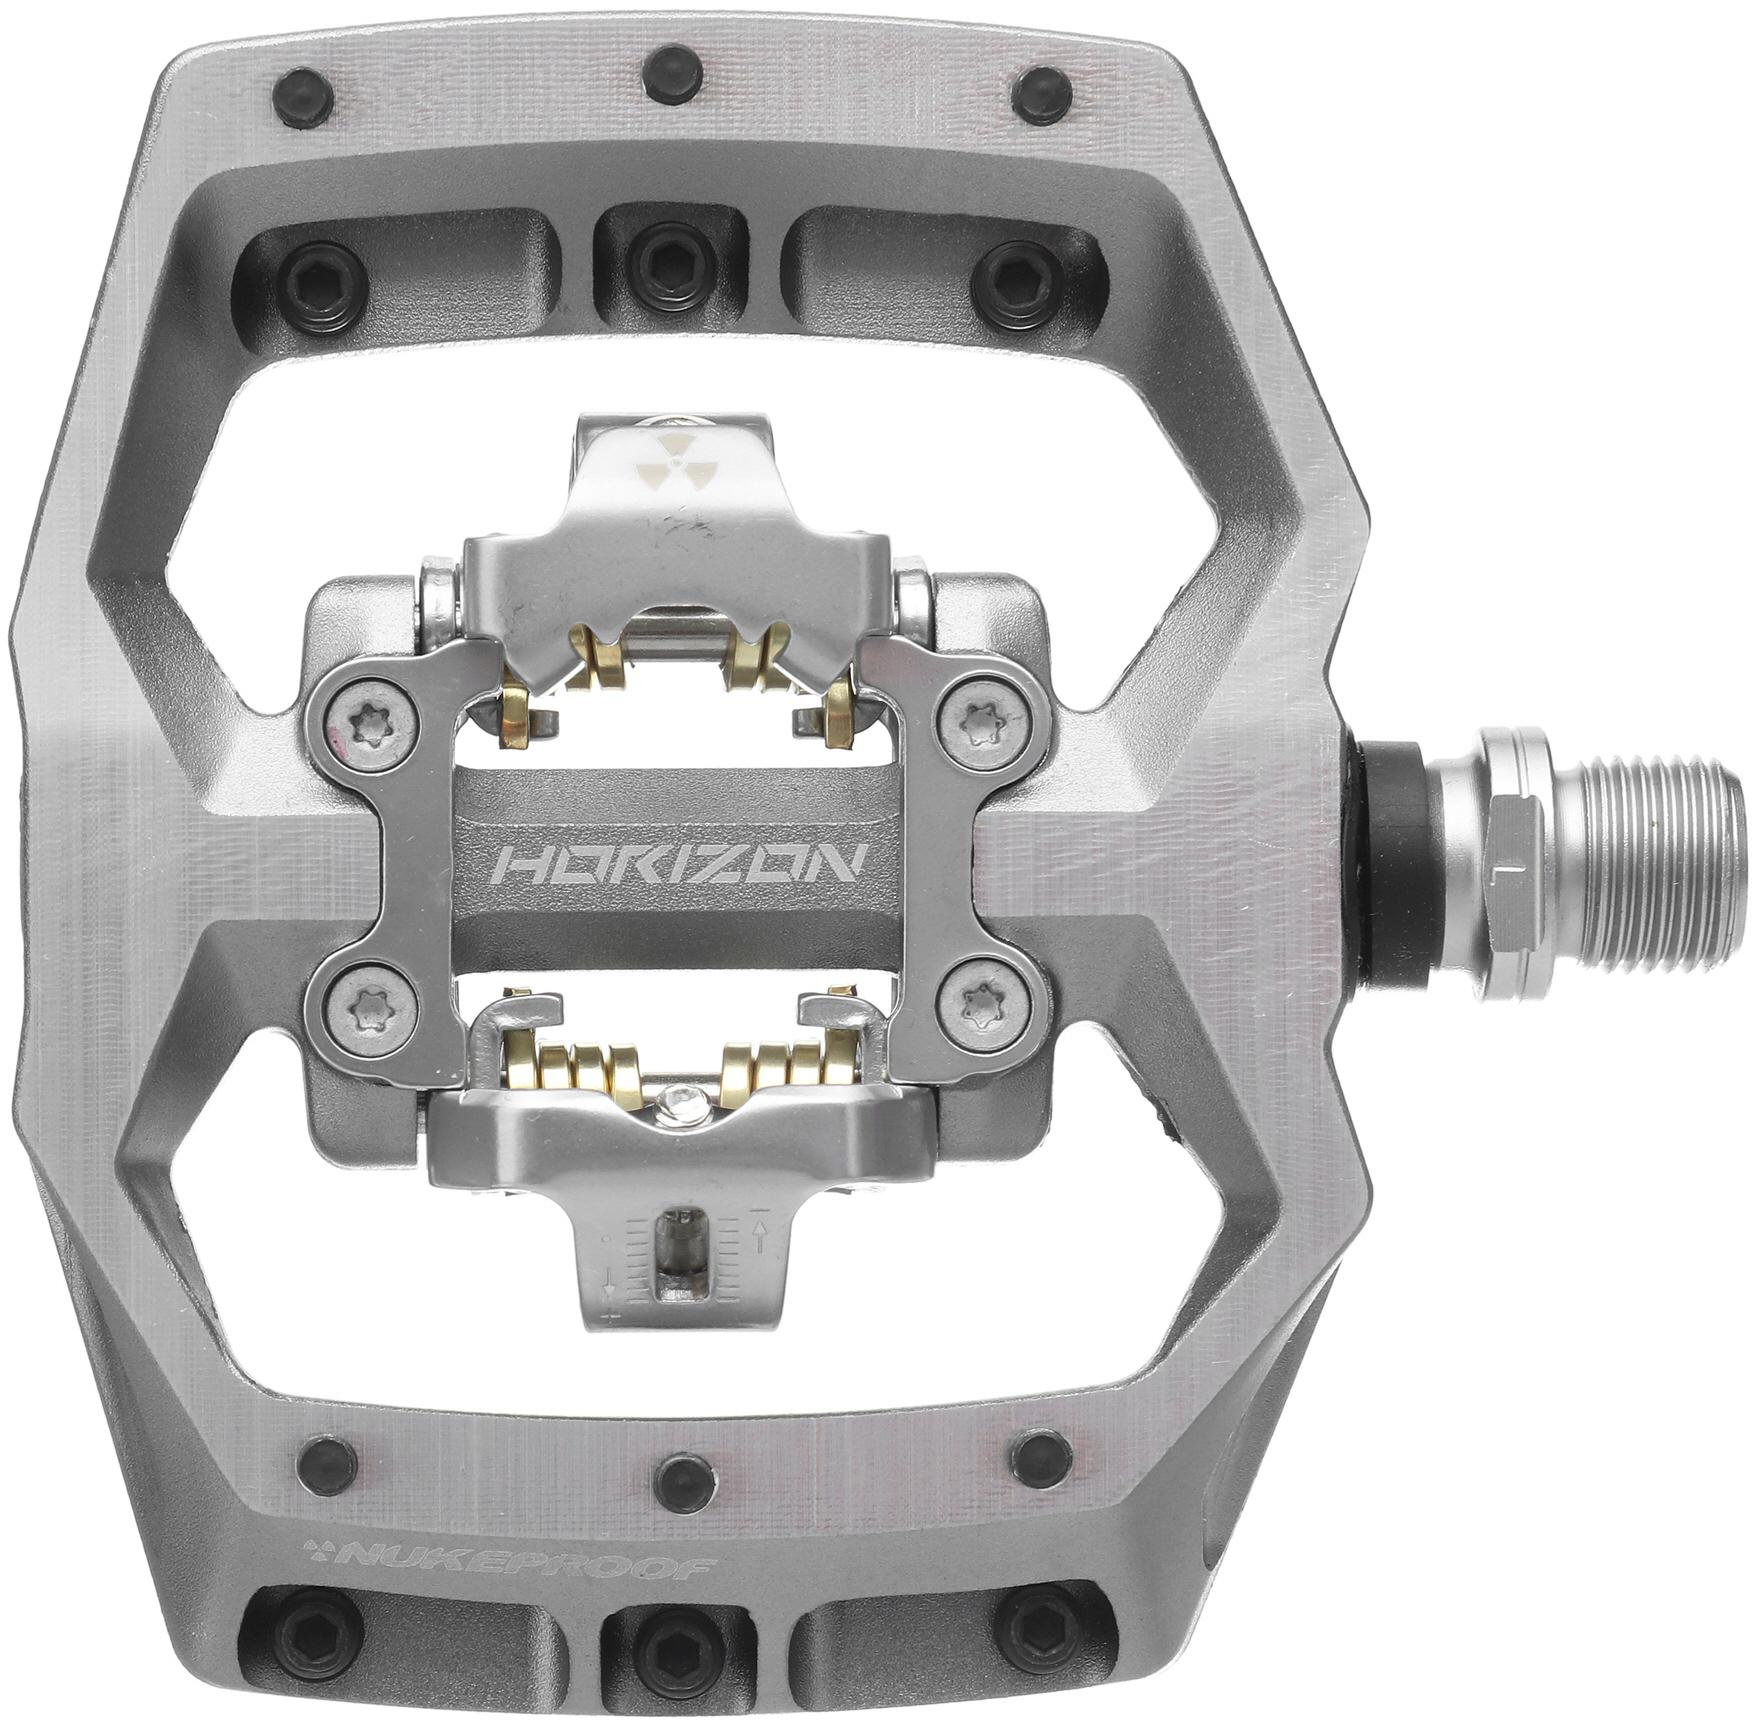 Nukeproof Horizon Cl Crmo Downhill Pedals - Grey